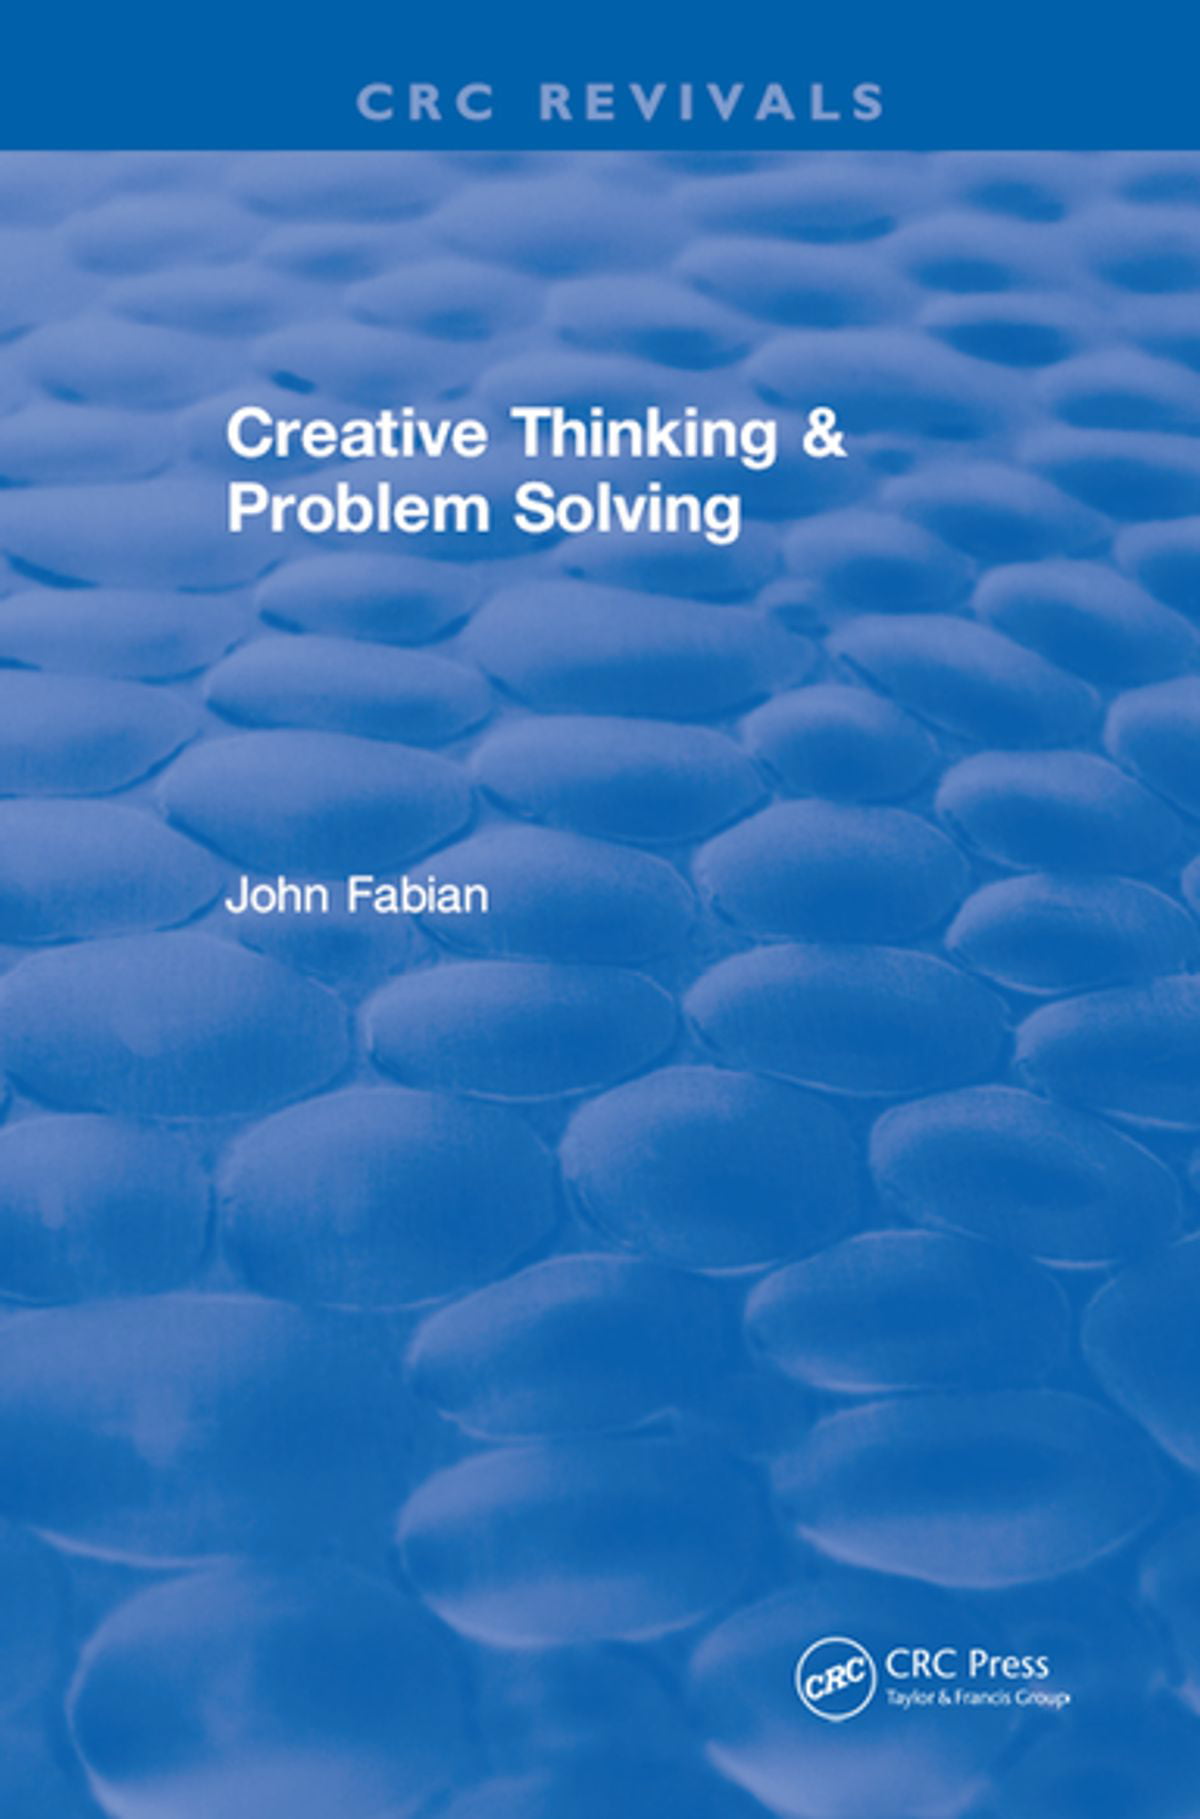 notes on creative thinking and problem solving grade 10